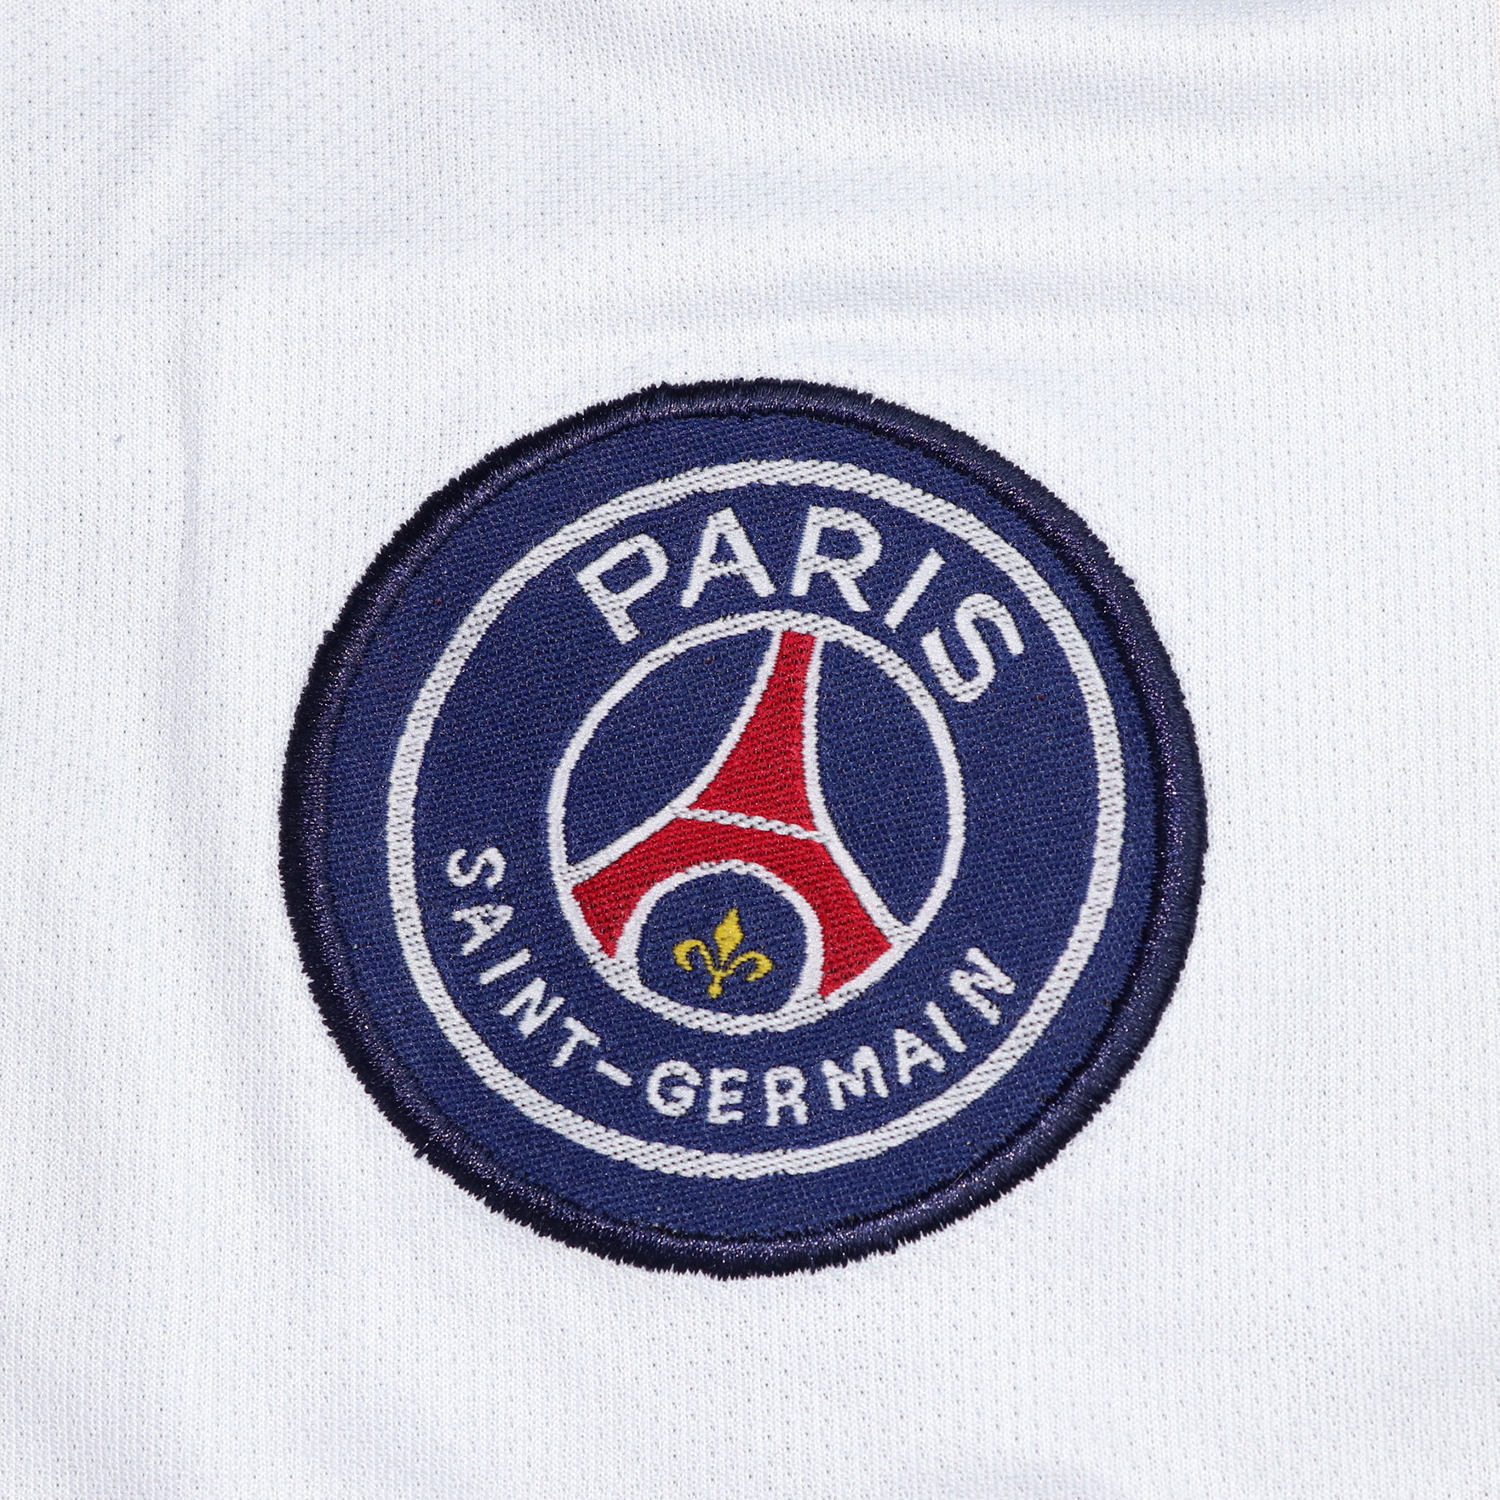 PSG Home Jersey